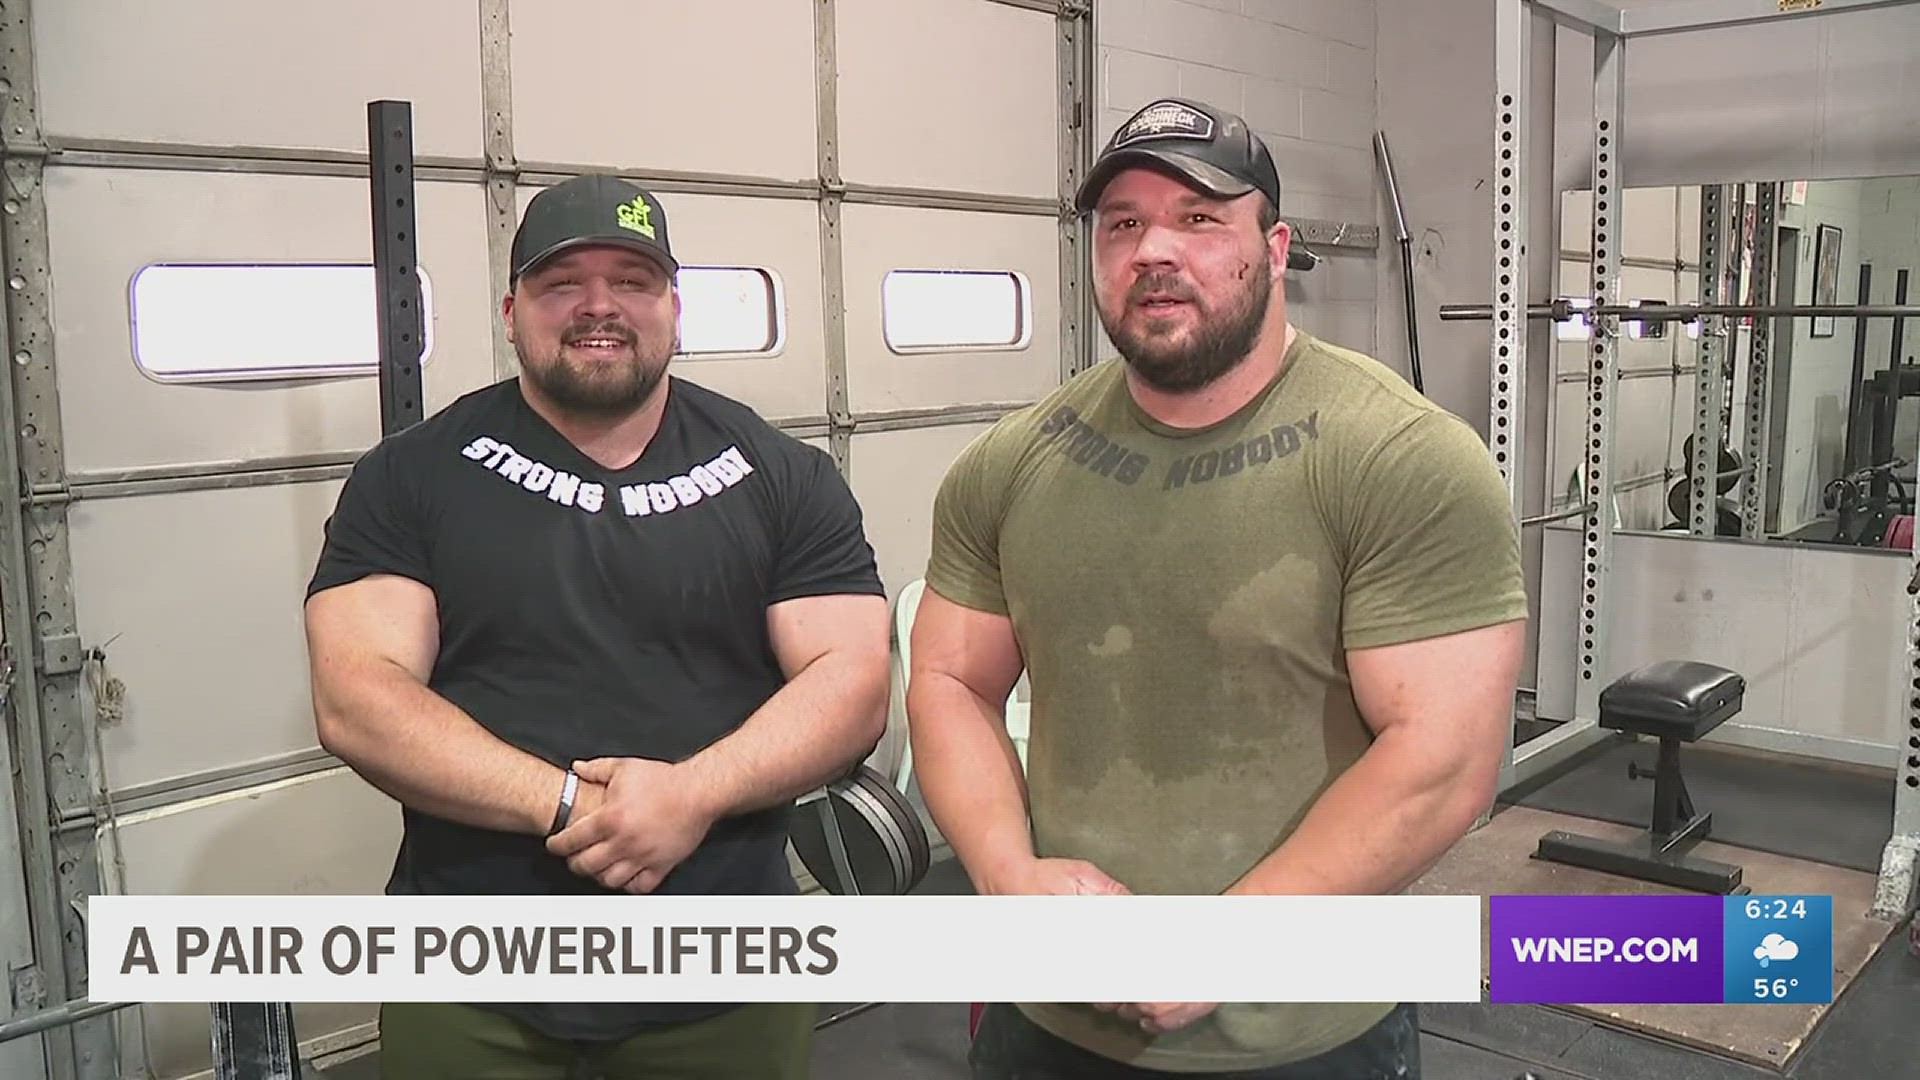 These two brothers are from Mahanoy Area and have world record rankings in powerlifting